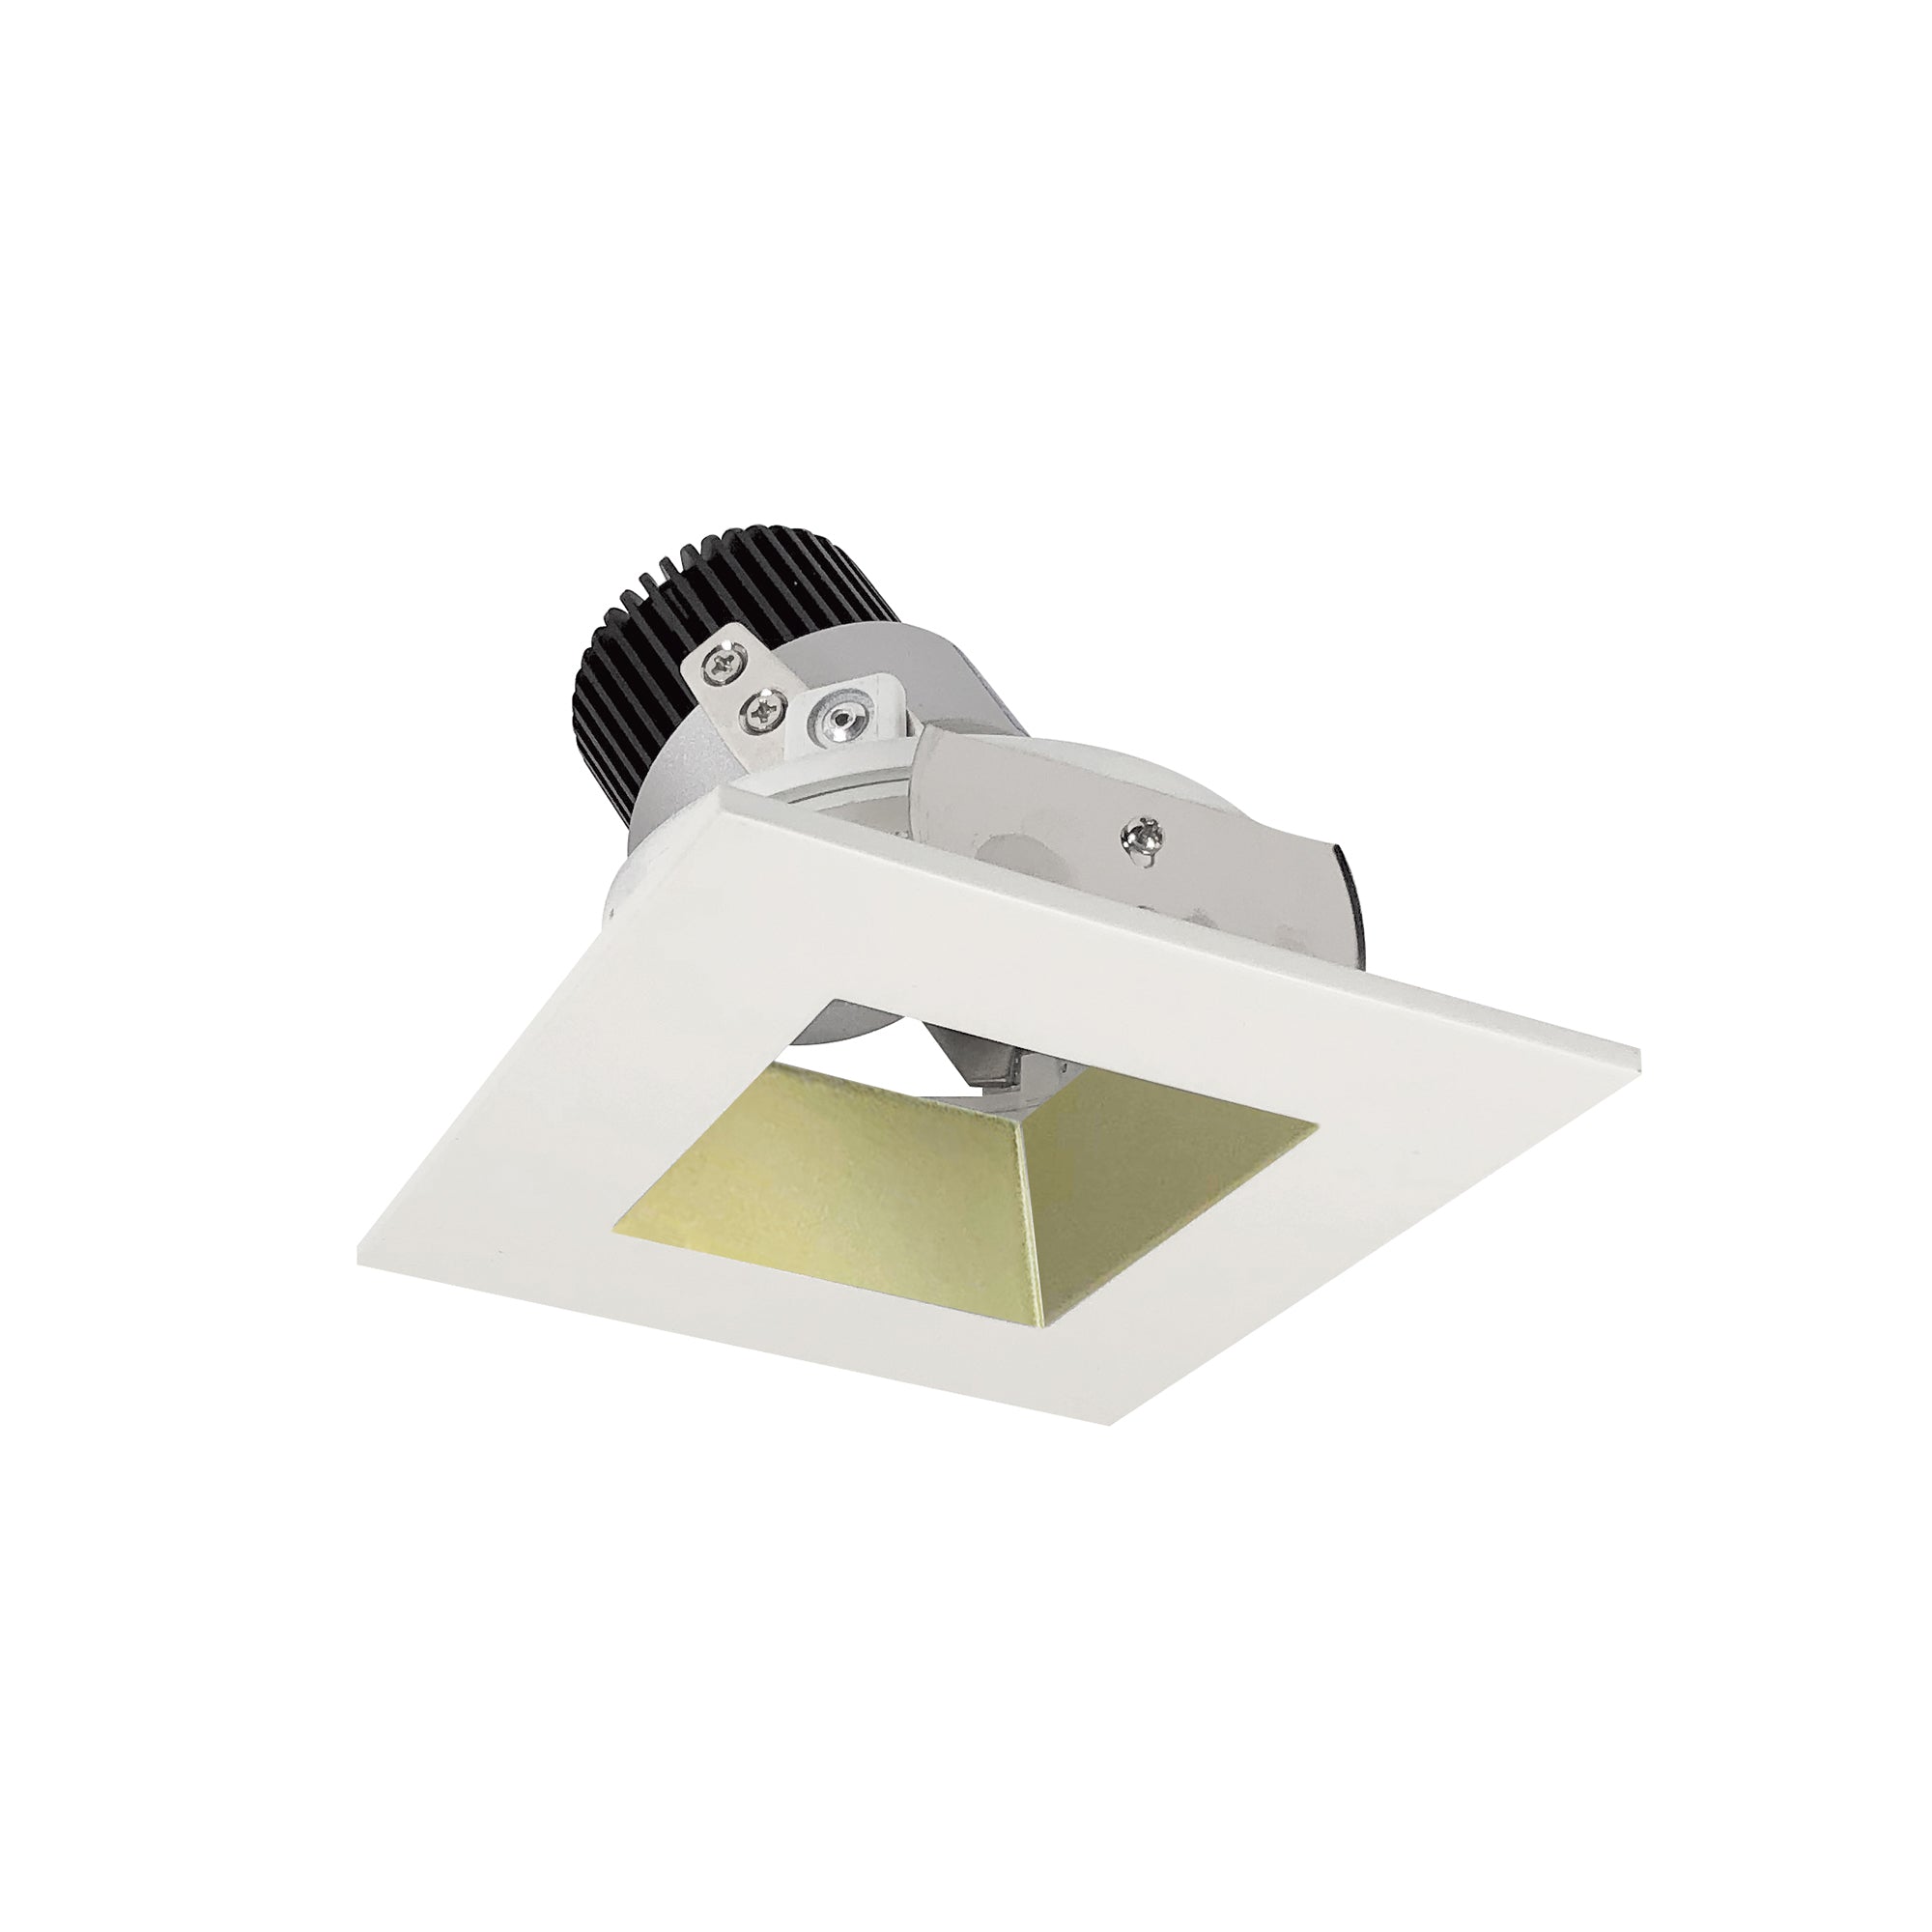 Nora Lighting NIO-4SDSQ30XCHMPW/10 4" Iolite LED Square Adjustable Reflector With Square Aperture, 1000lm / 14W, 3000K - Champagne Haze Reflector / Matte Powder White Flange